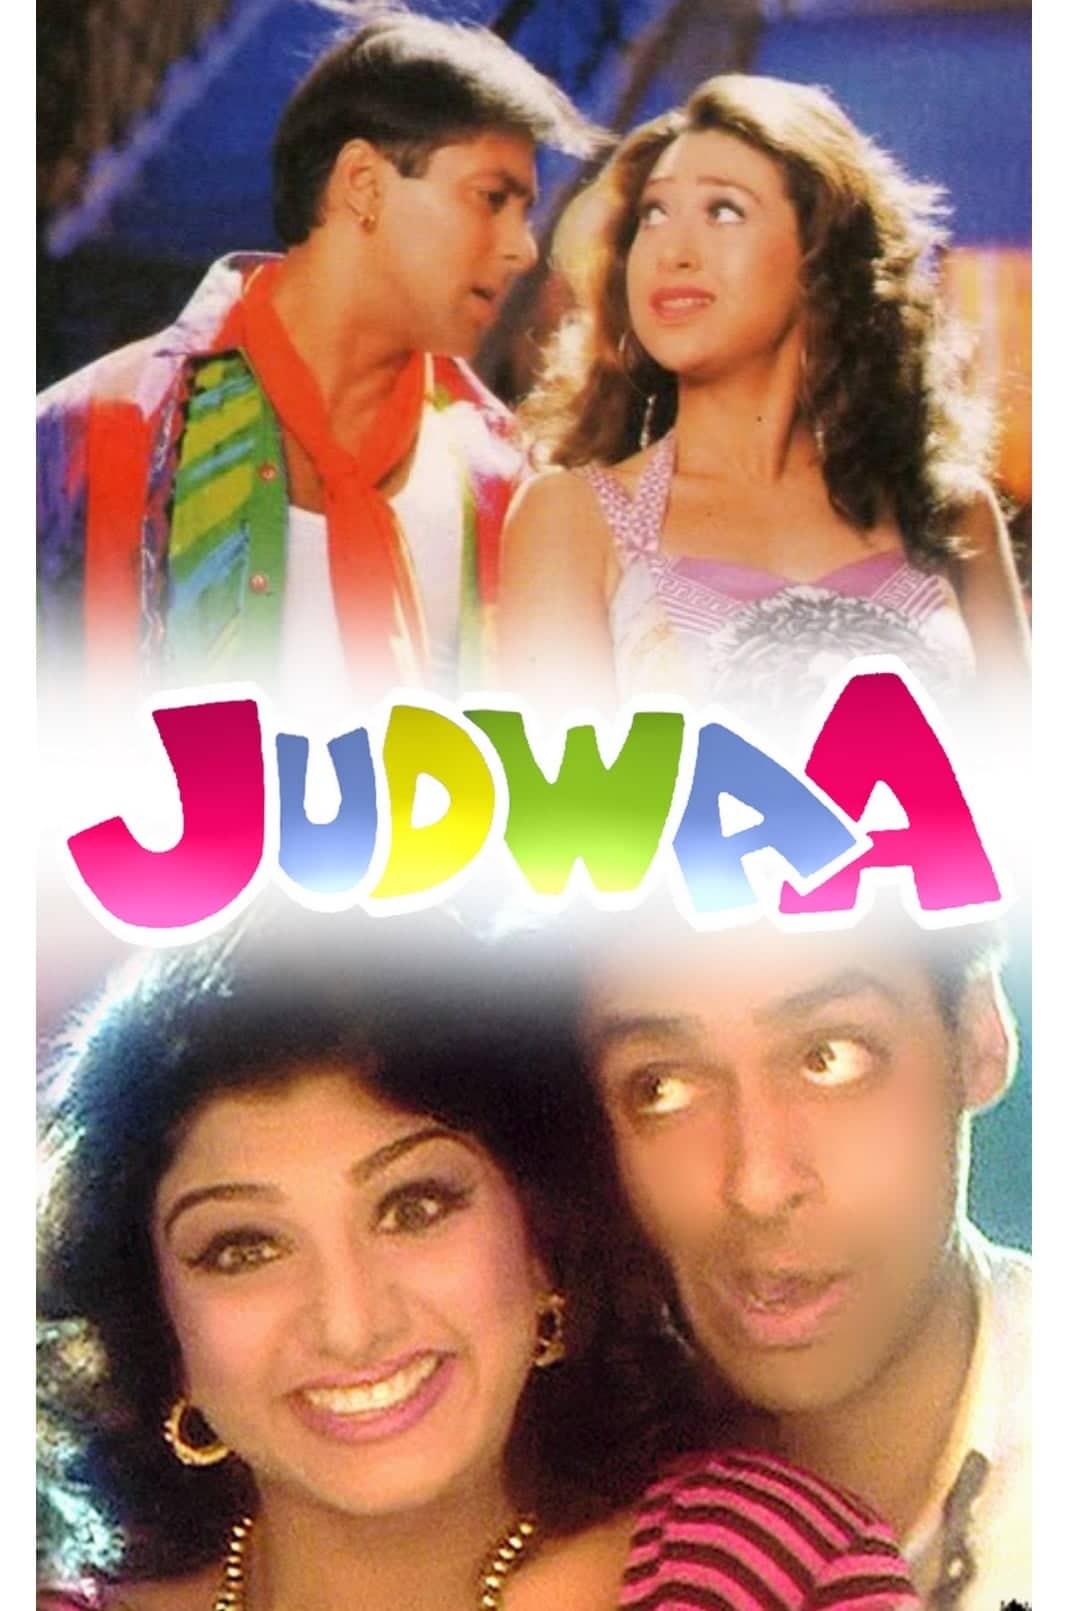 Poster for the movie "Judwaa"